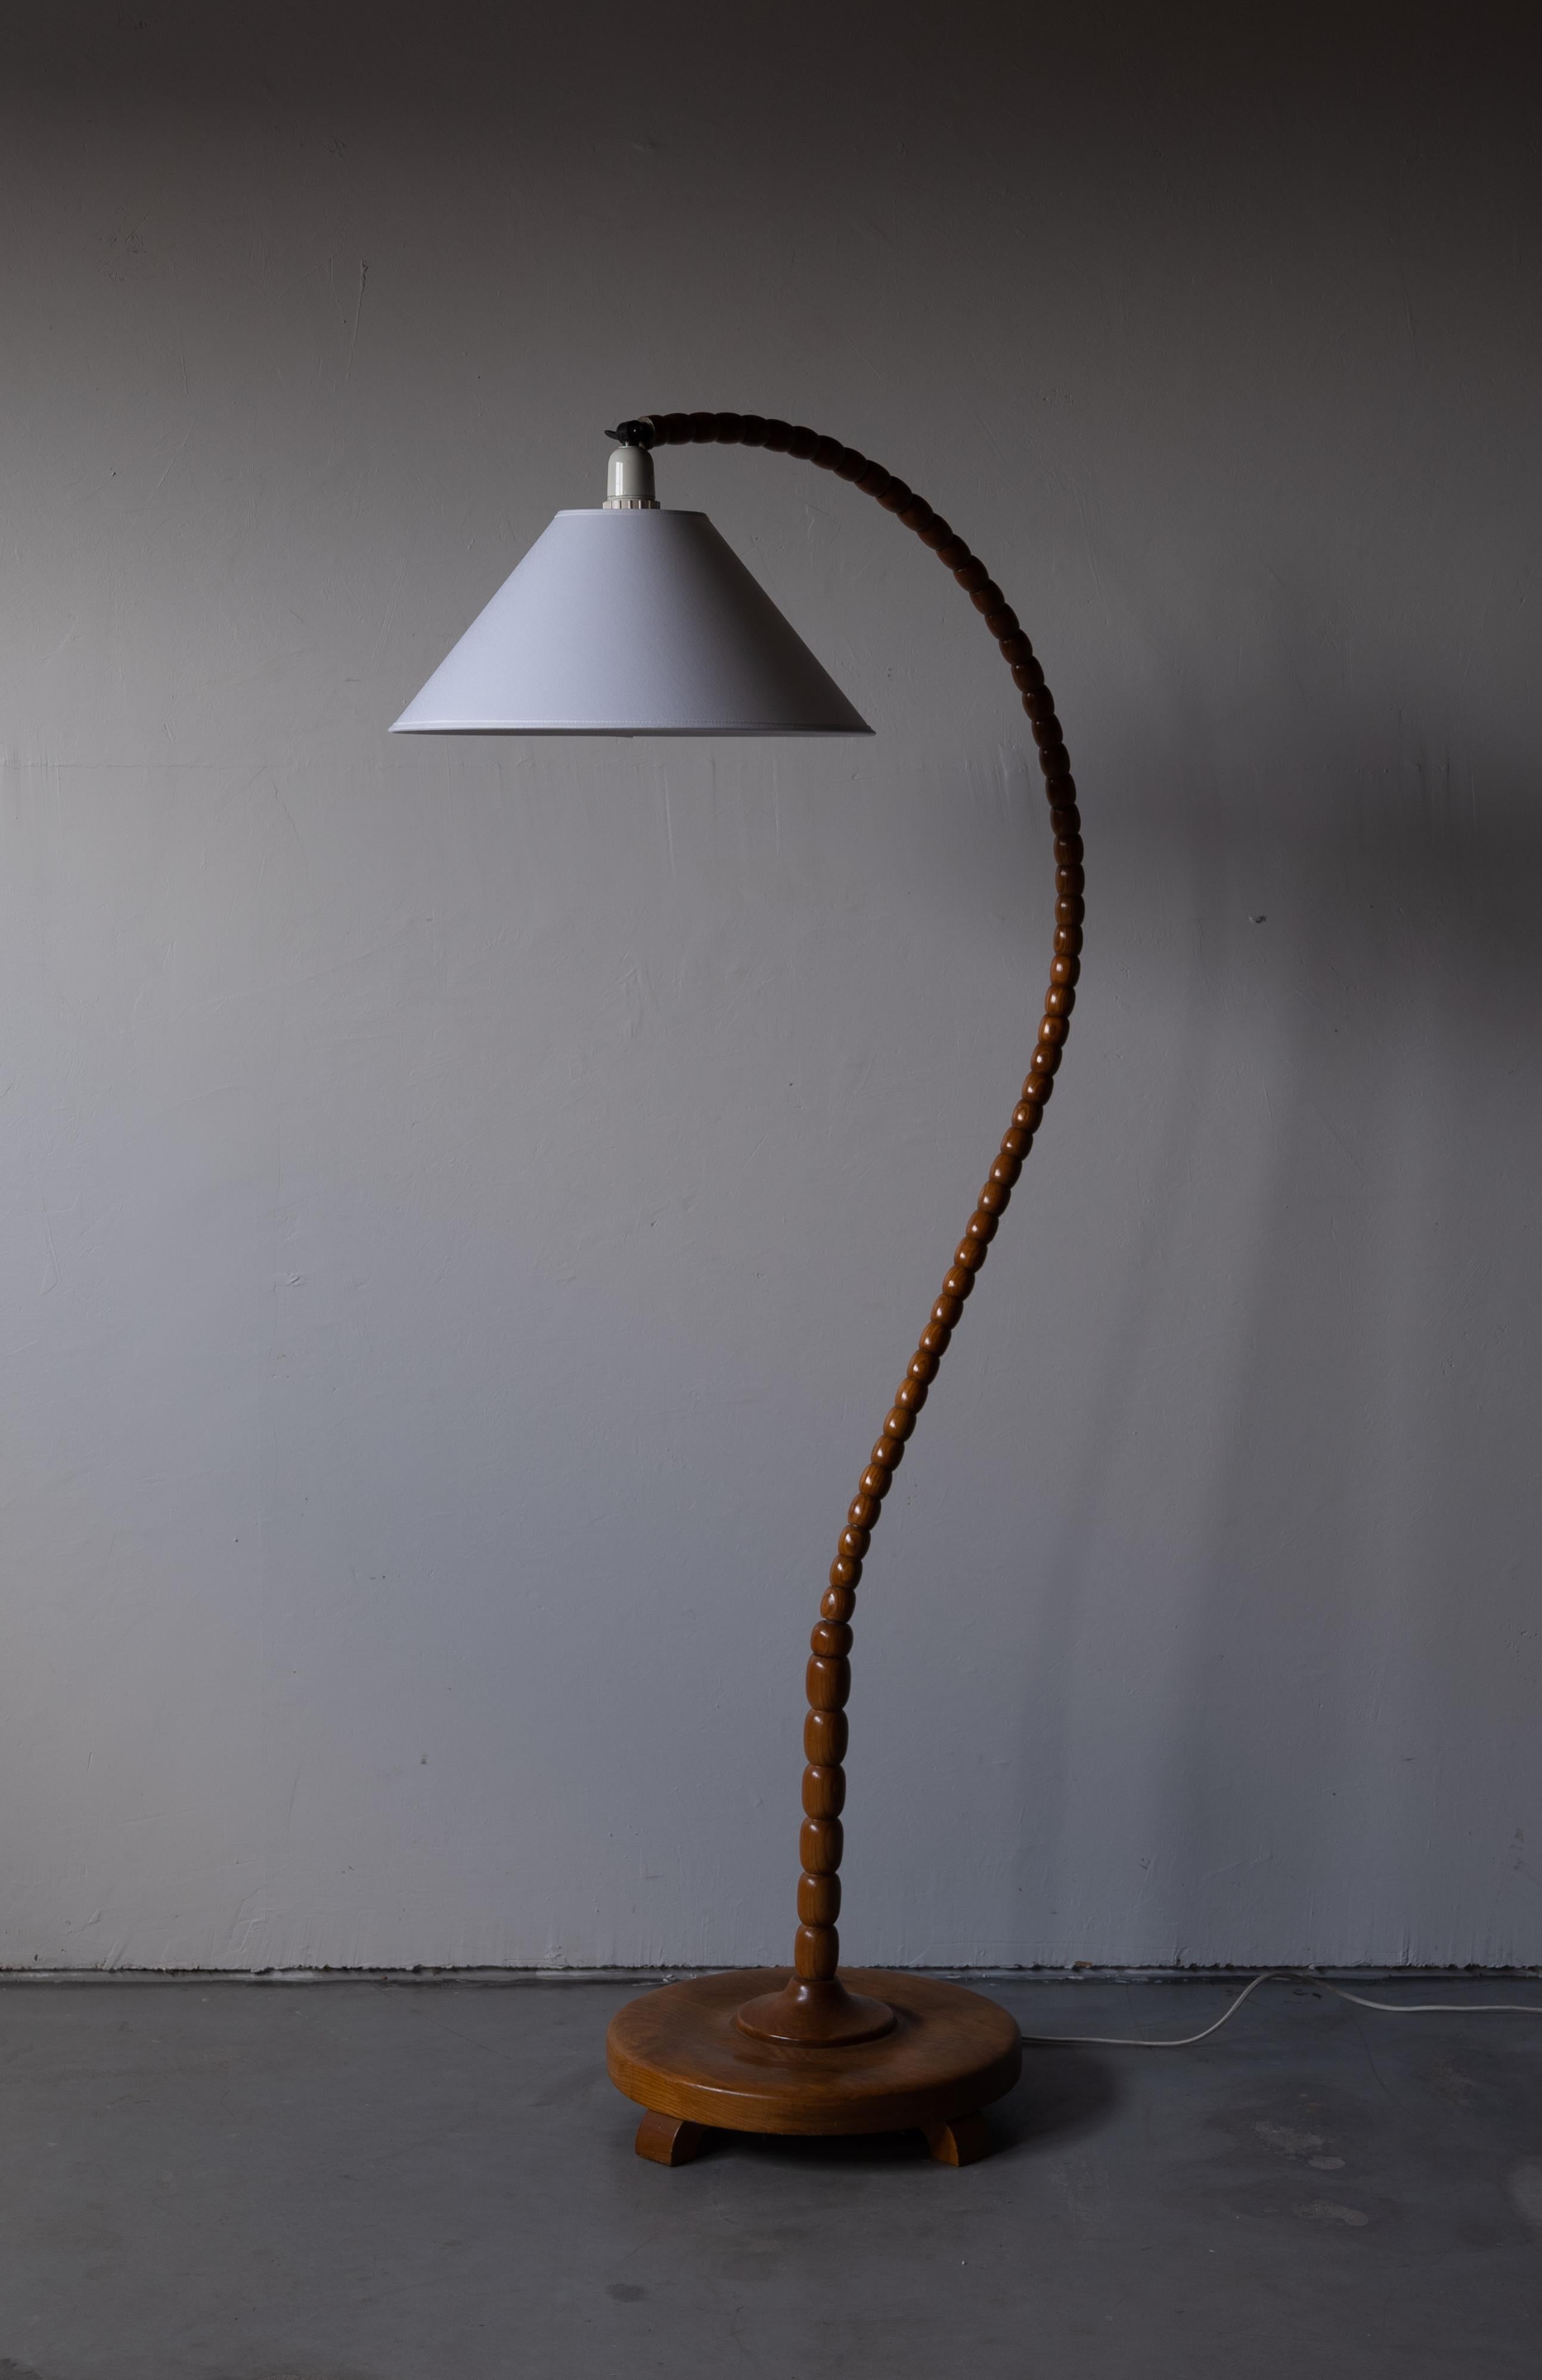 An organic floor lamp. Designed by an unknown Swedish modernist designer, 1930s. Produced in wood and brass. Brand new lampshade.

Other designers working in the organic style include Jean Royère, Gio Ponti, Vladimir Kagan, Ico Parisi, and George